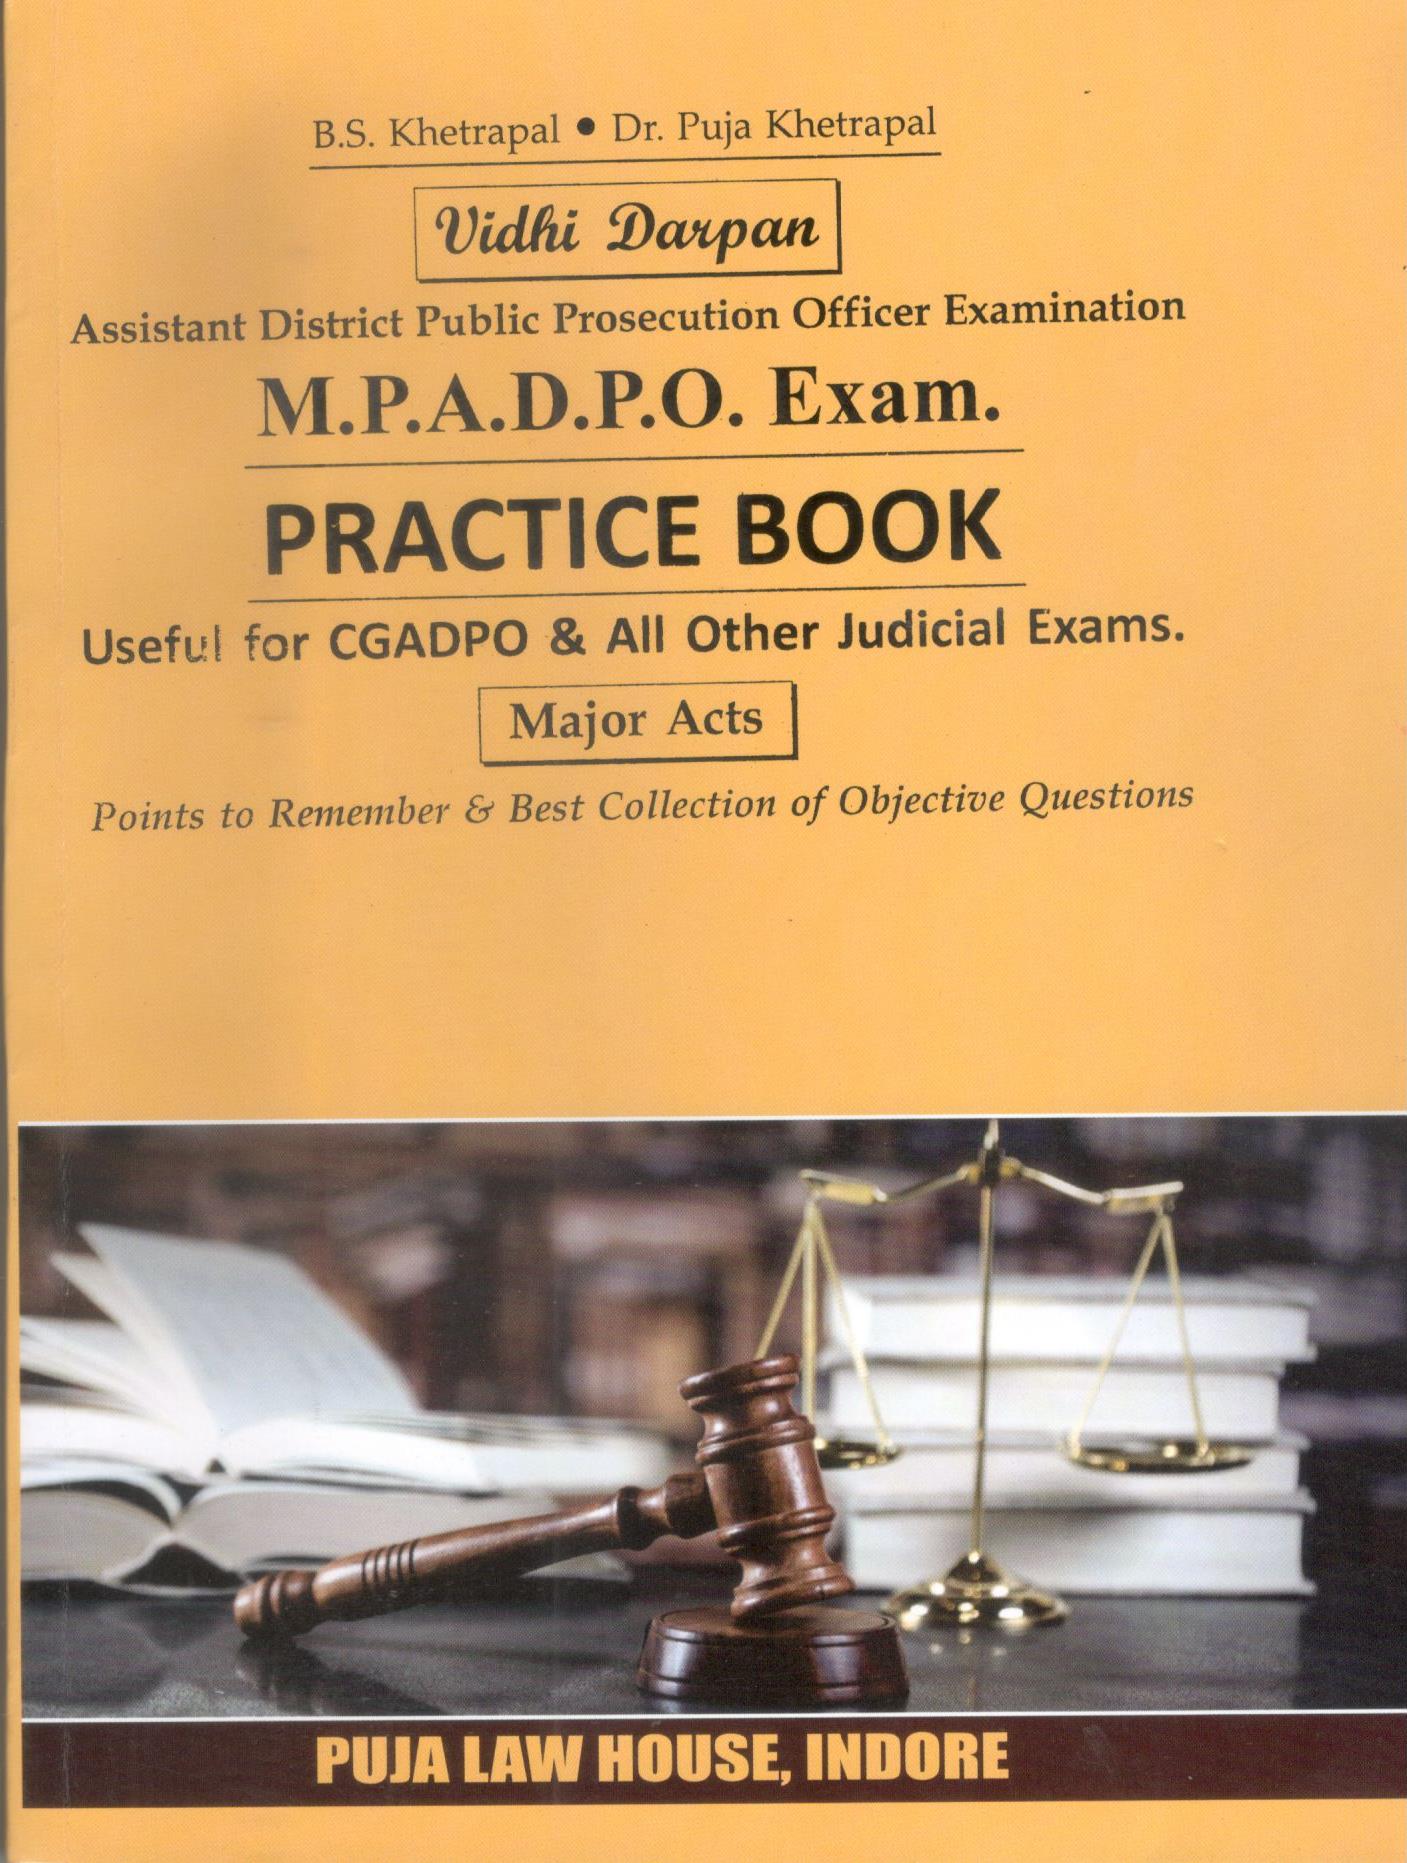  Buy Vidhi Darpan - Assistant District Public Prosecution Officer Examination [M.P.A.D.P.O. EXAM.] PRACTICE BOOK  (MAJOR ACTS)